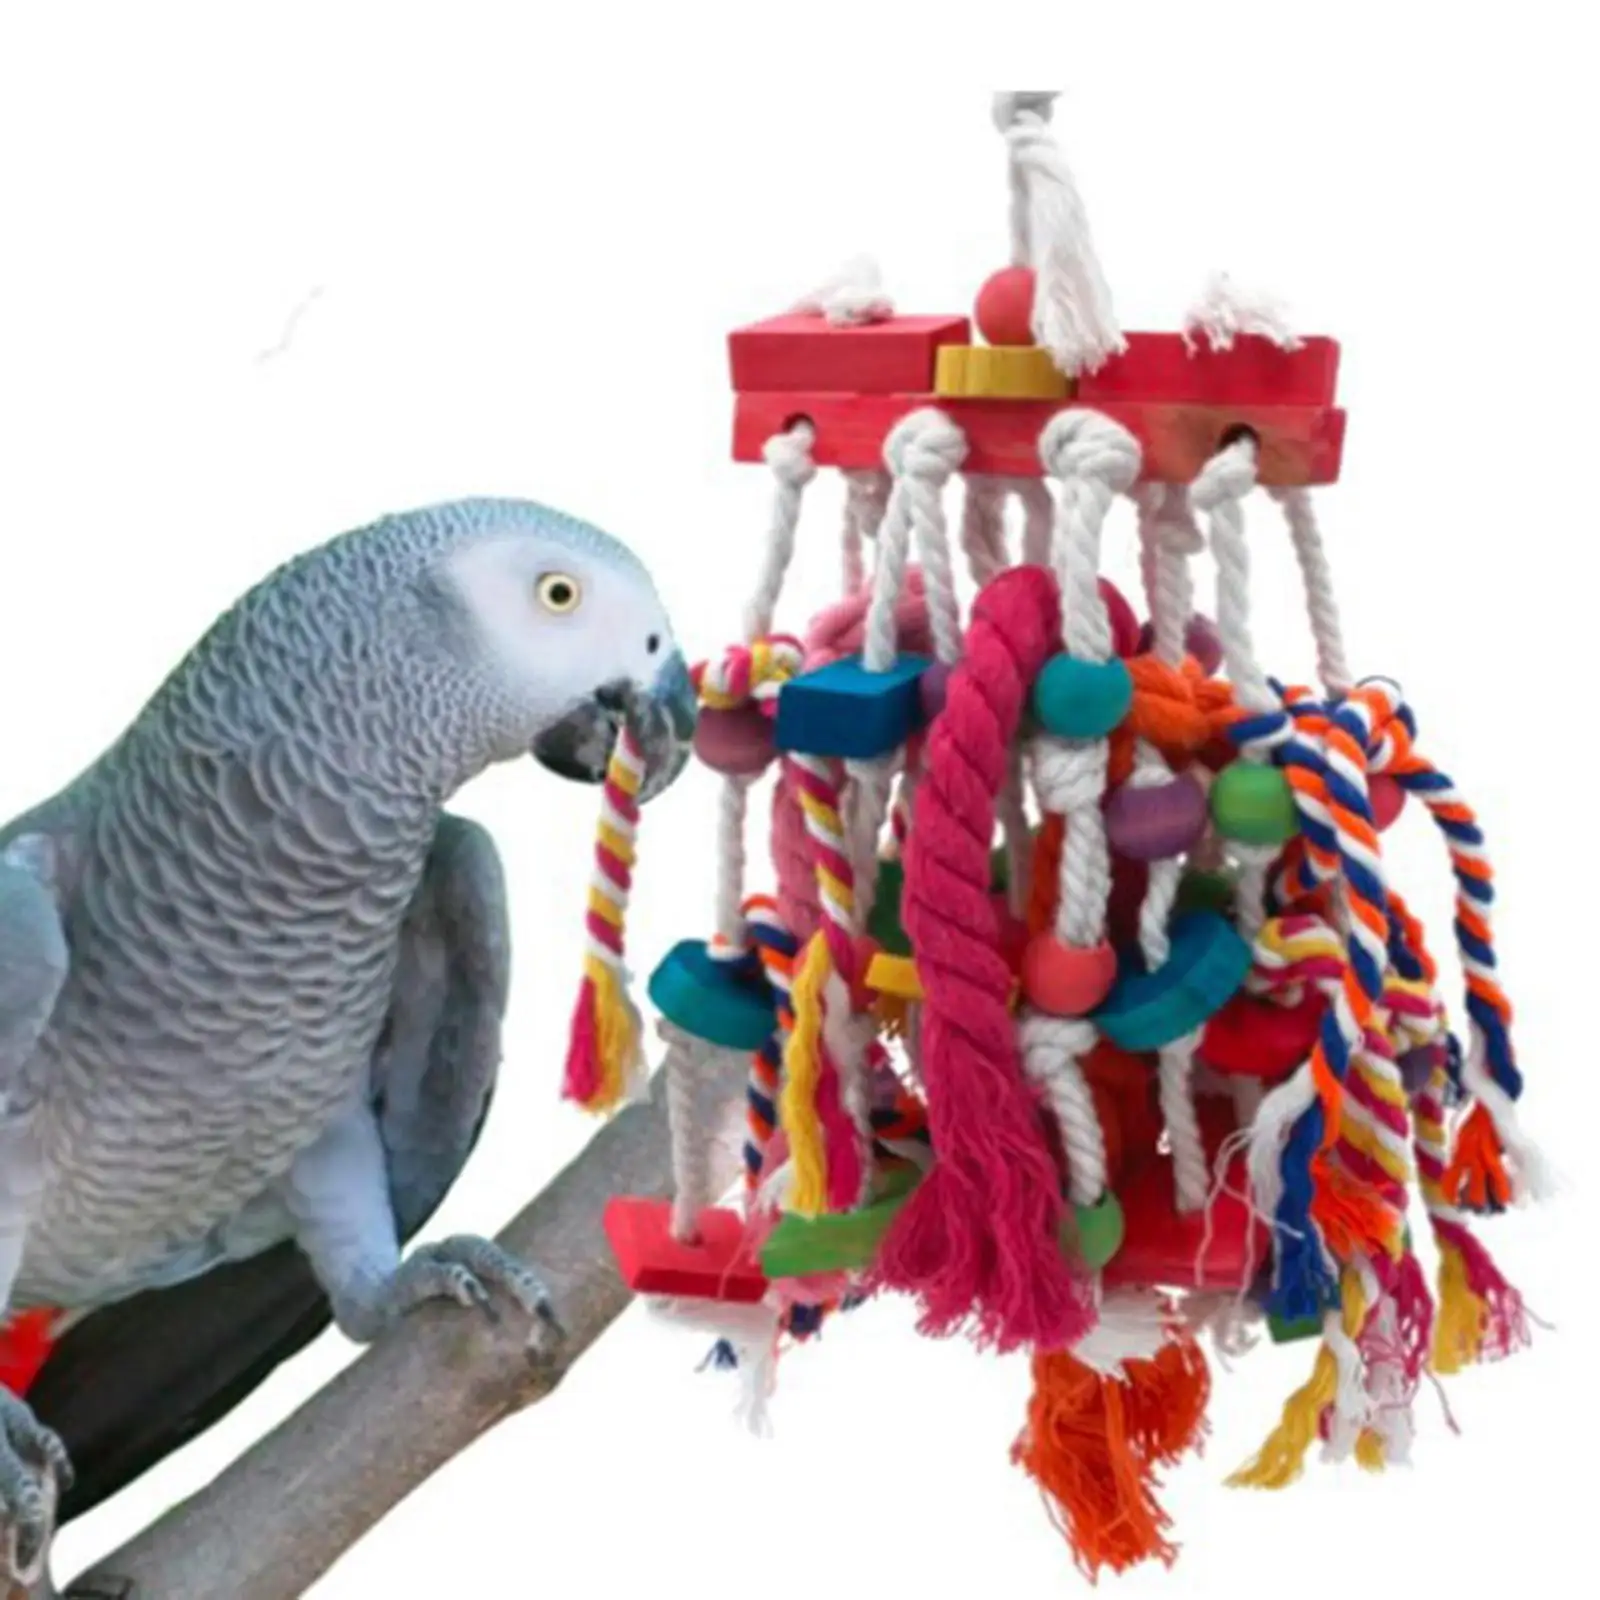 Large Parrot Toys Perch Tearing Toy Hanging Swing Multicolored Wooden Blocks Cage Bite for Lovebird Cockatoos Finches Budgie